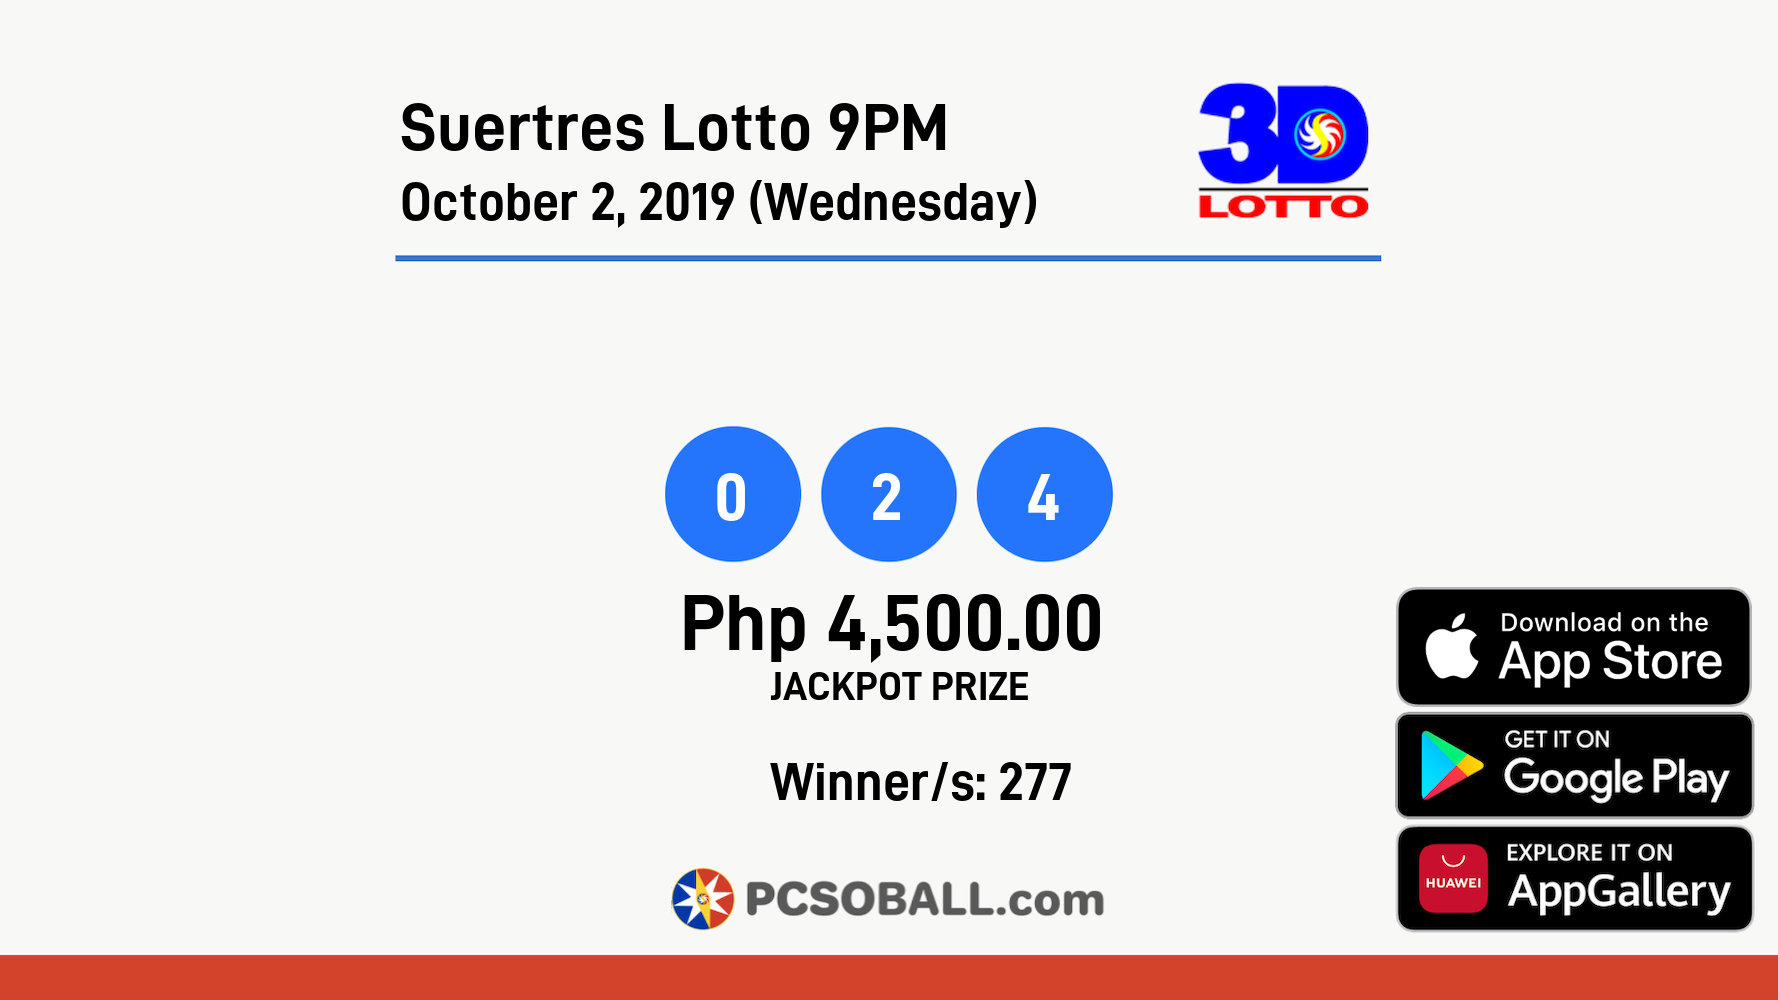 Suertres Lotto 9PM October 2, 2019 (Wednesday) Result